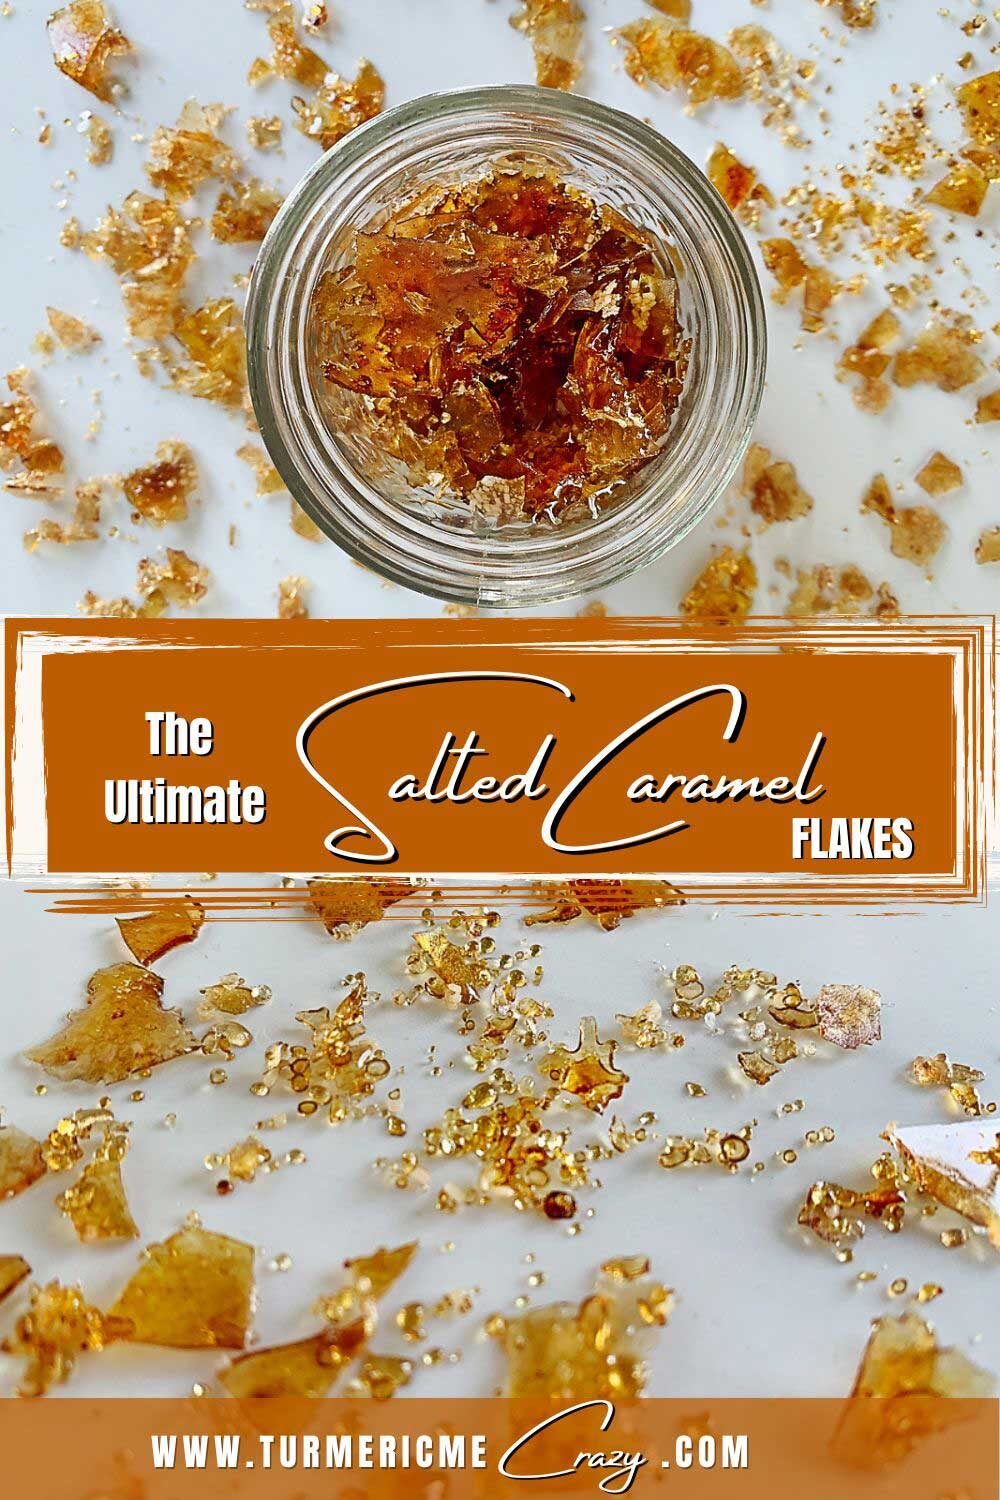 This quick & easy recipe - Ultimate Salted Caramel Flakes are crunchy with the perfect mix of sweet & salty, you'll love these tasty treats! salted caramel sprinkles, caramel, caramel candy, 2 ingredient candy, natural candy sprinkles